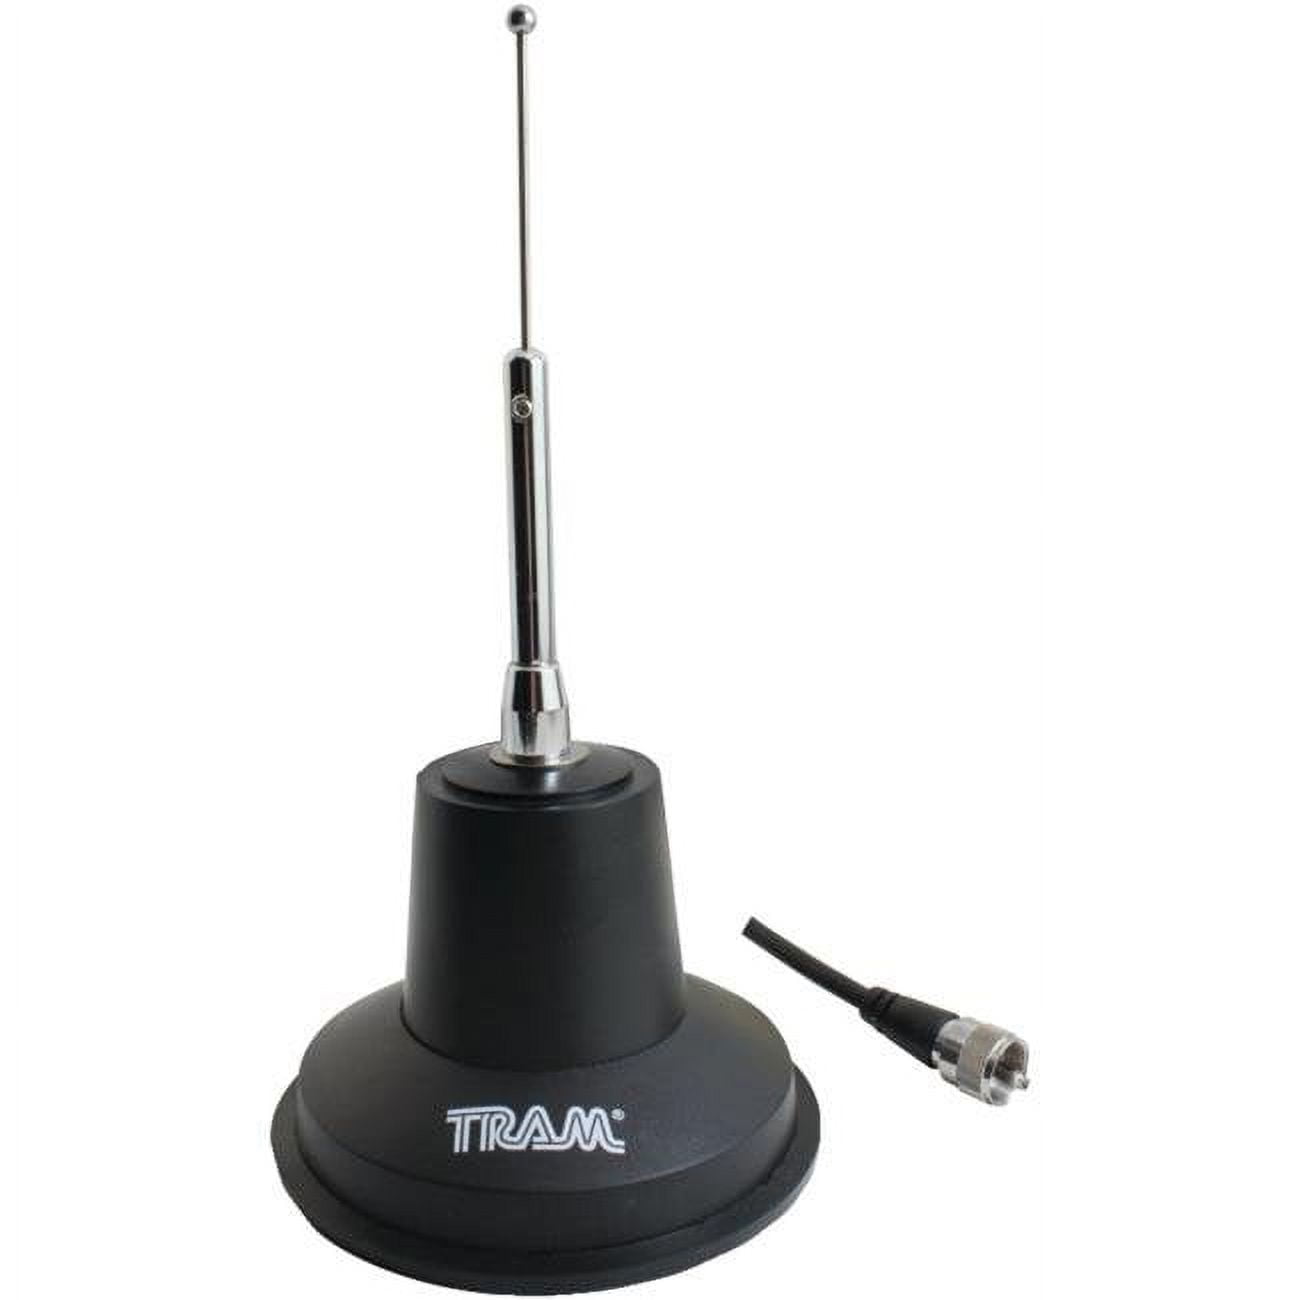 Tram CB Antenna 5-inch Magnet Kit with RG8X Coax and Rubber Boot